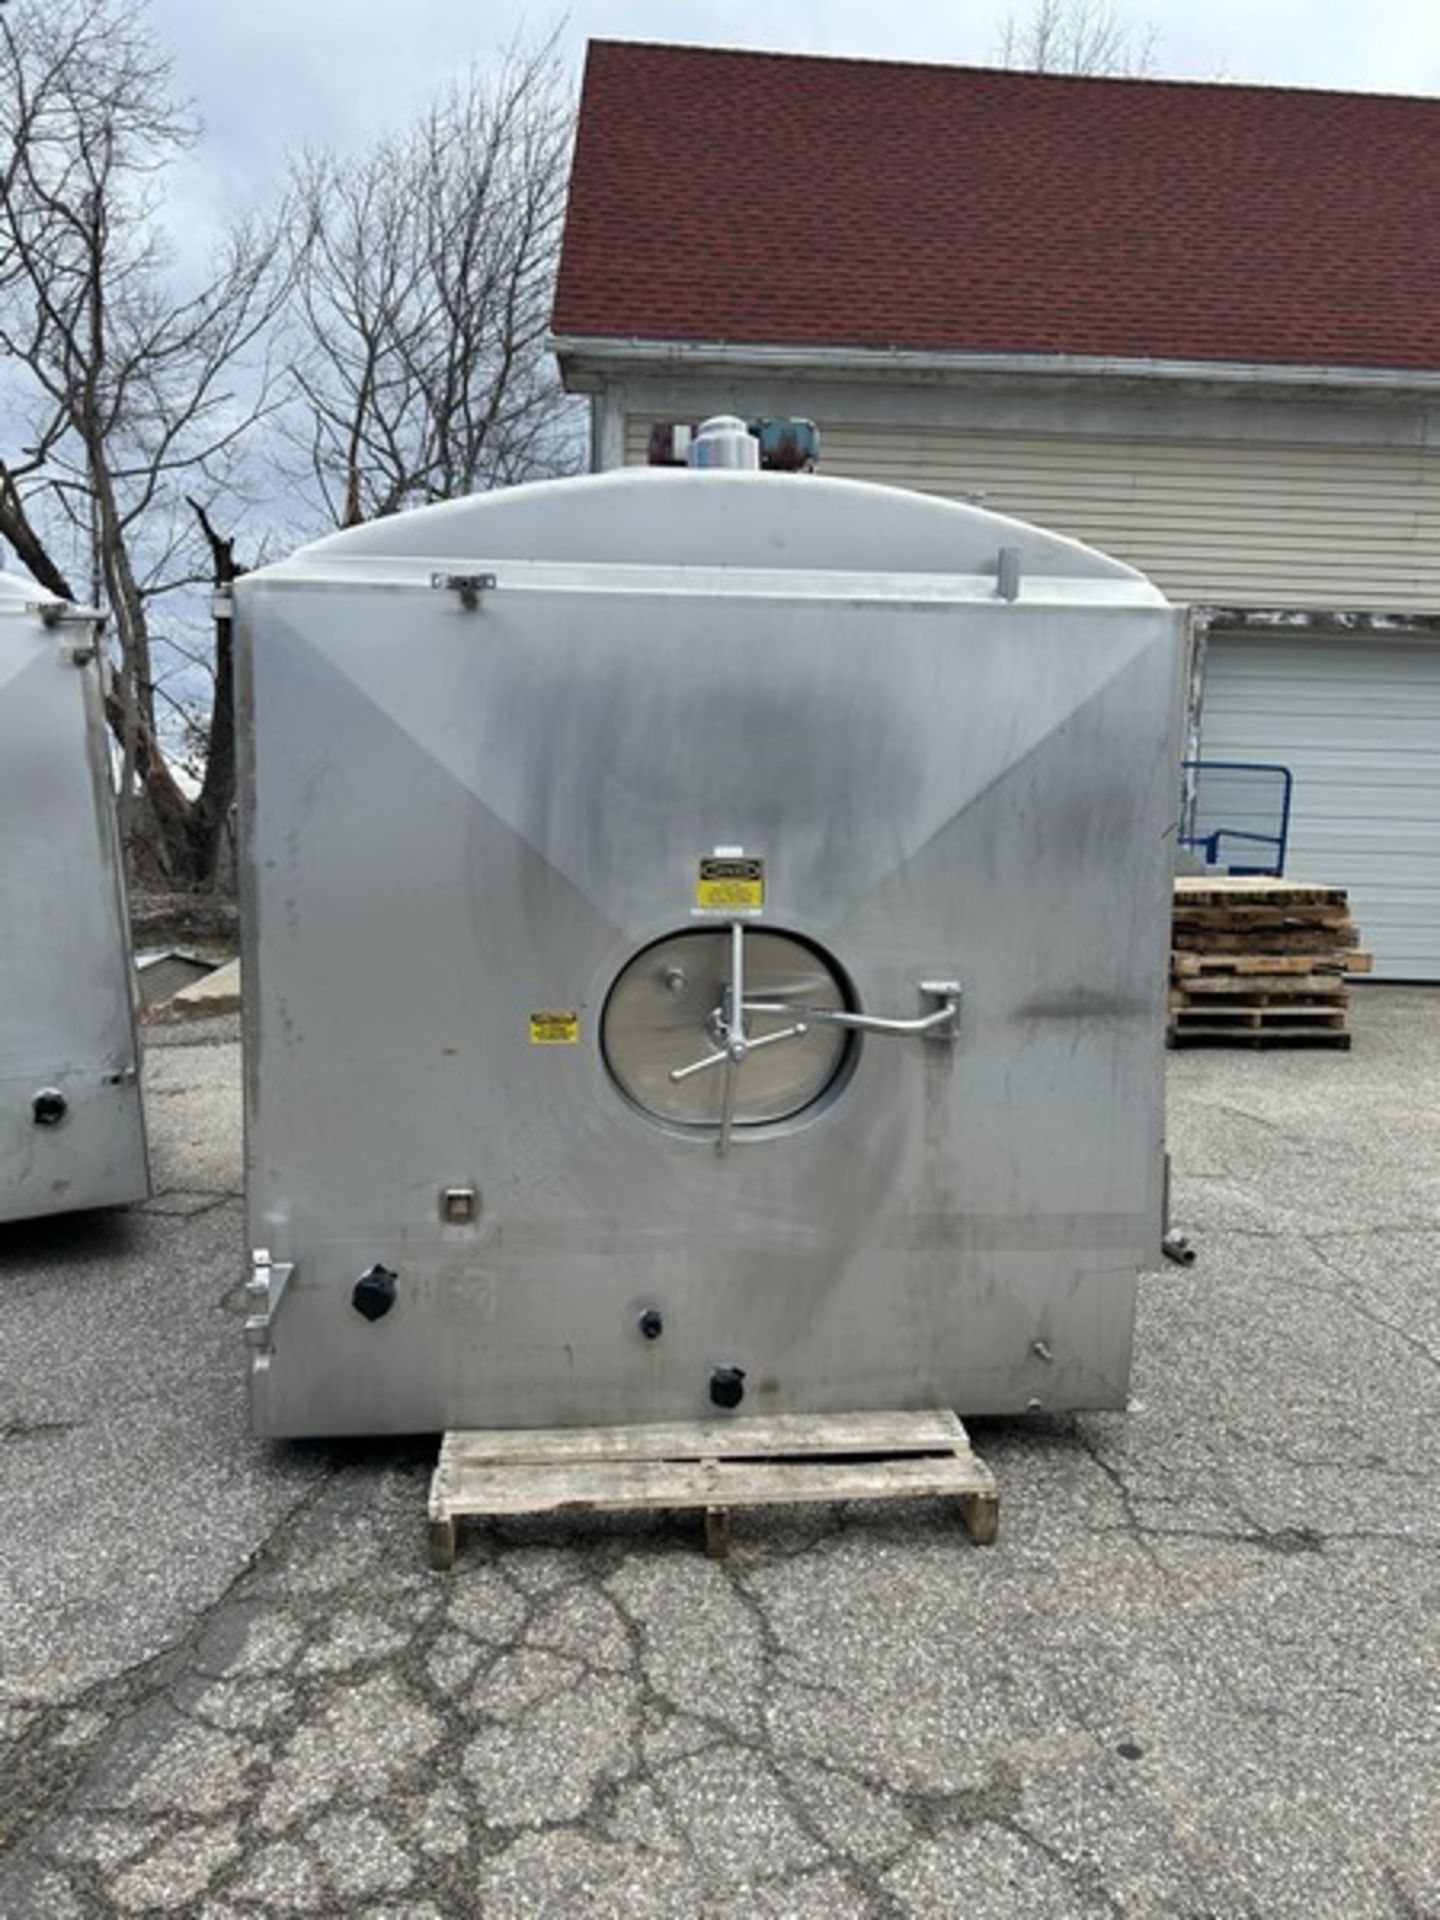 2500 gallon capacity insulated rectangular stainless steel blend tank. 1.5 HP 49 RPM vertical - Image 2 of 6